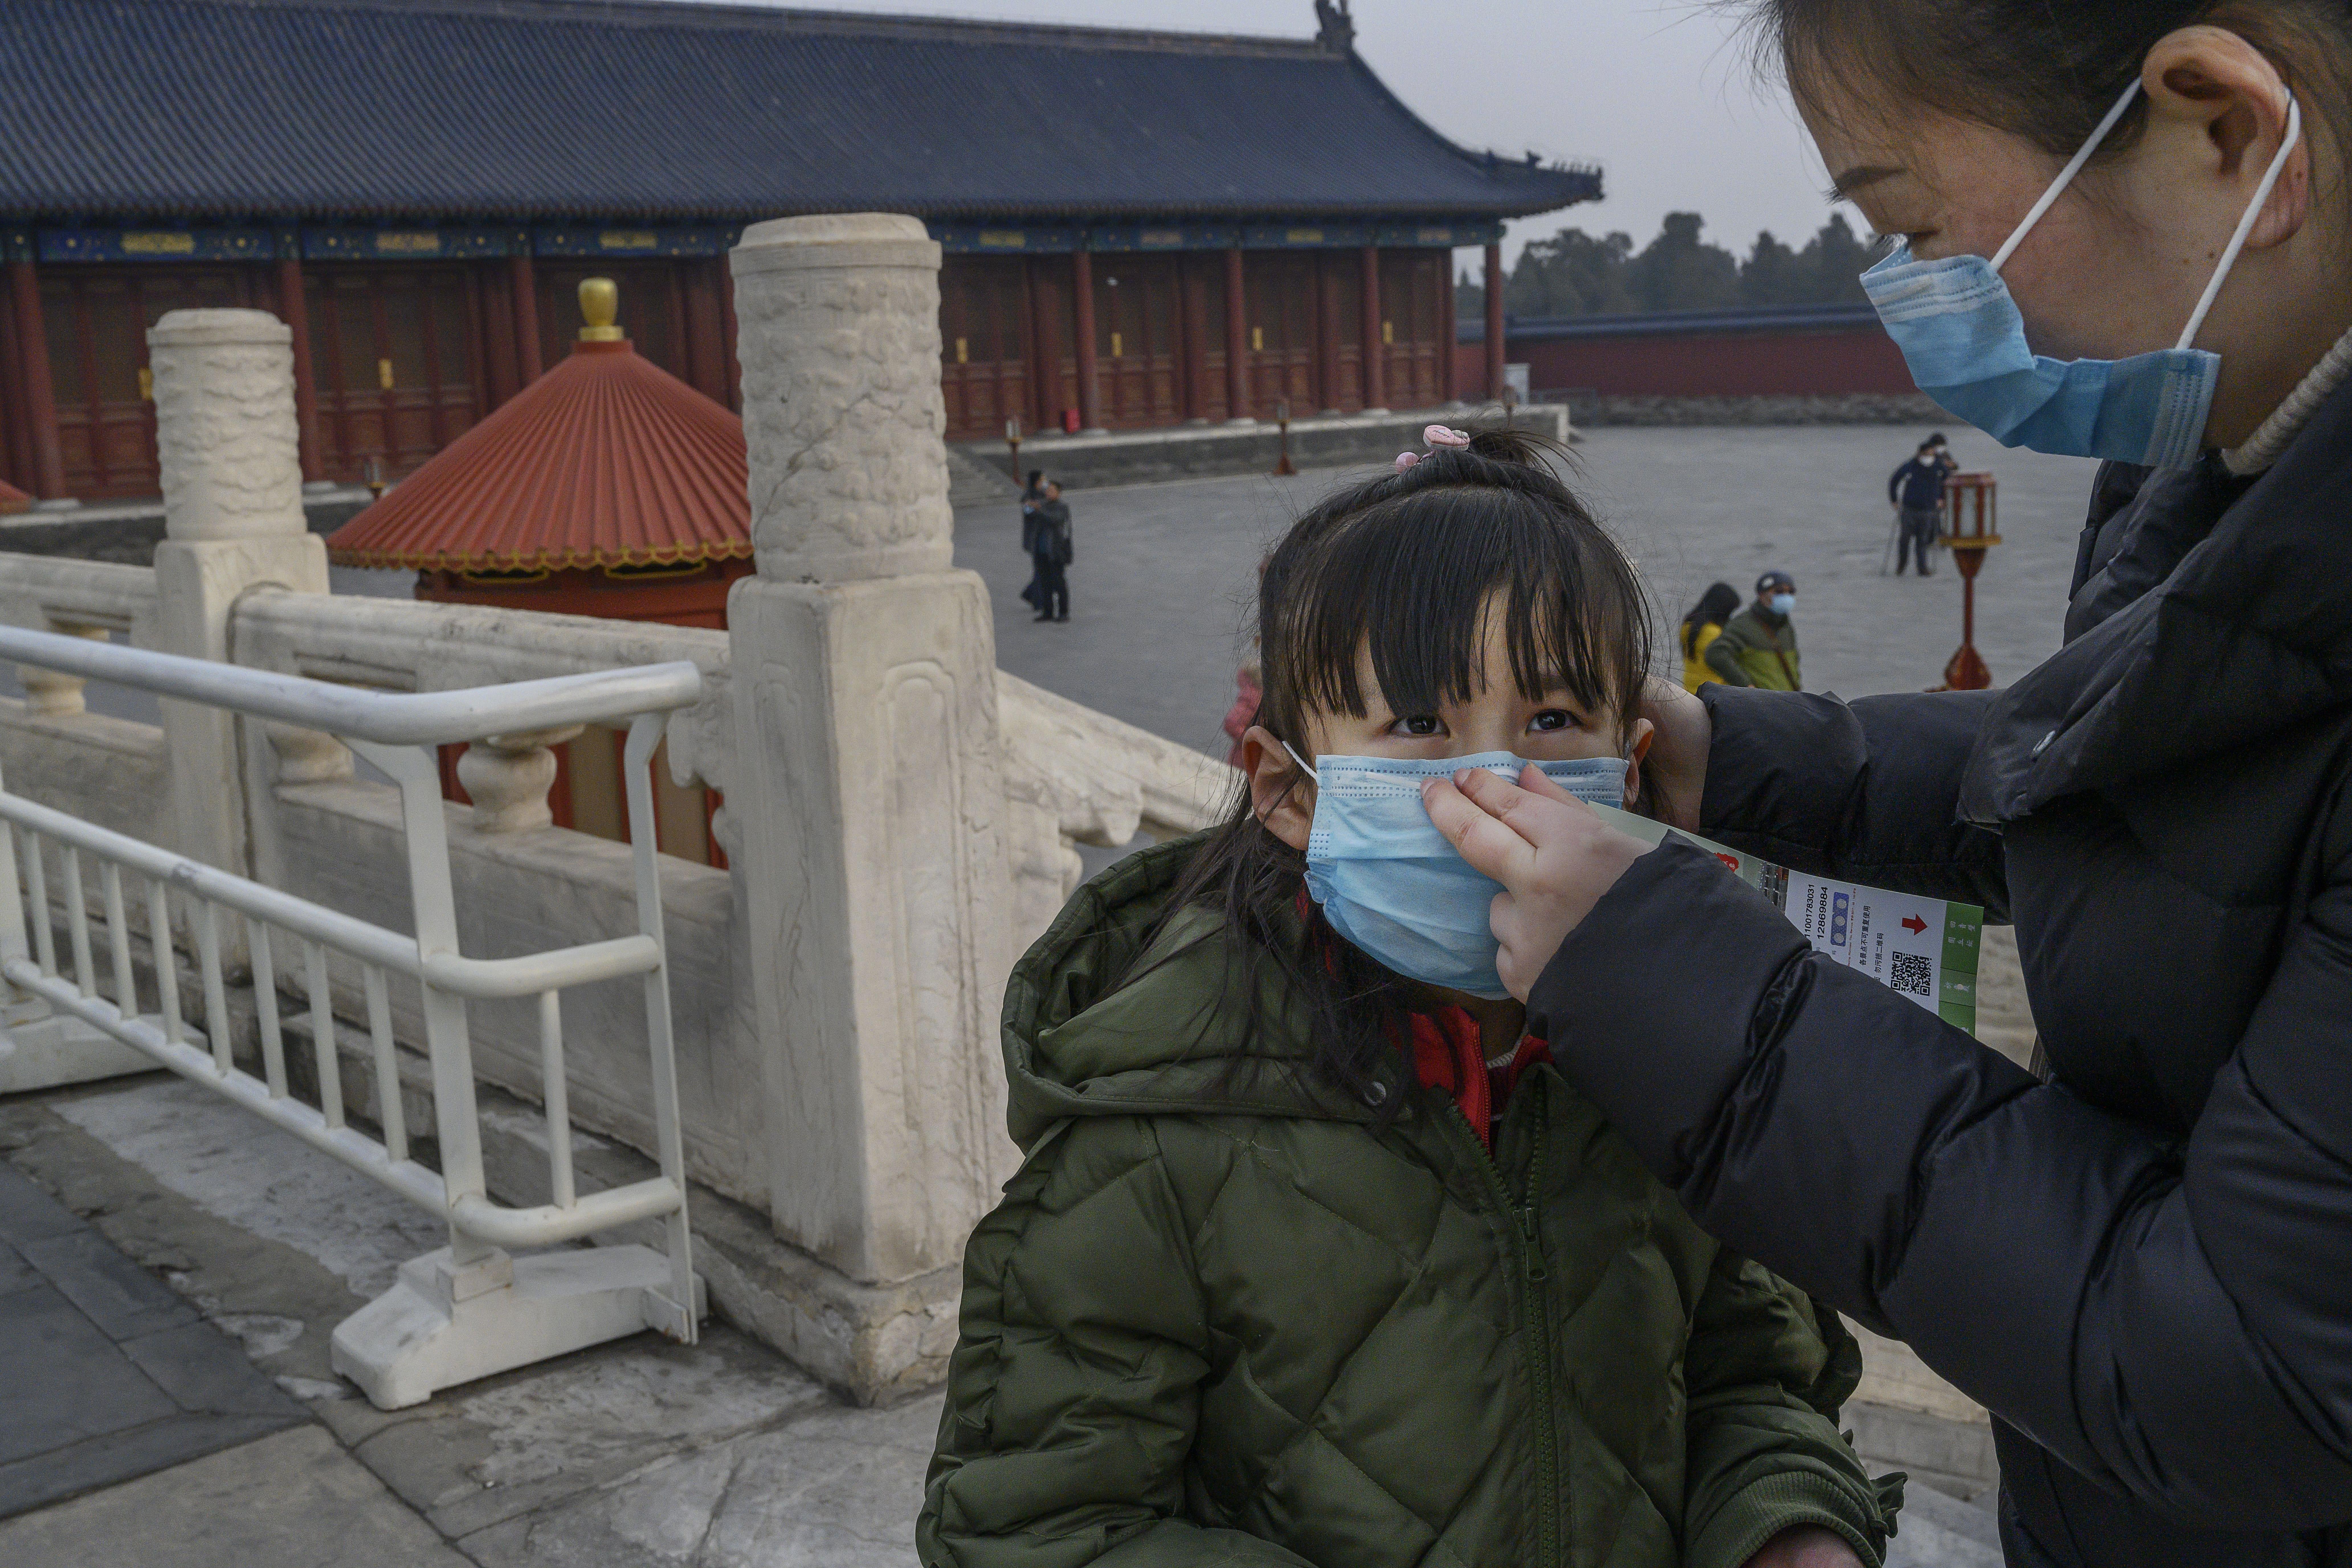 A woman with a protective mask places a mask on a young girl to her left in front of a red temple.